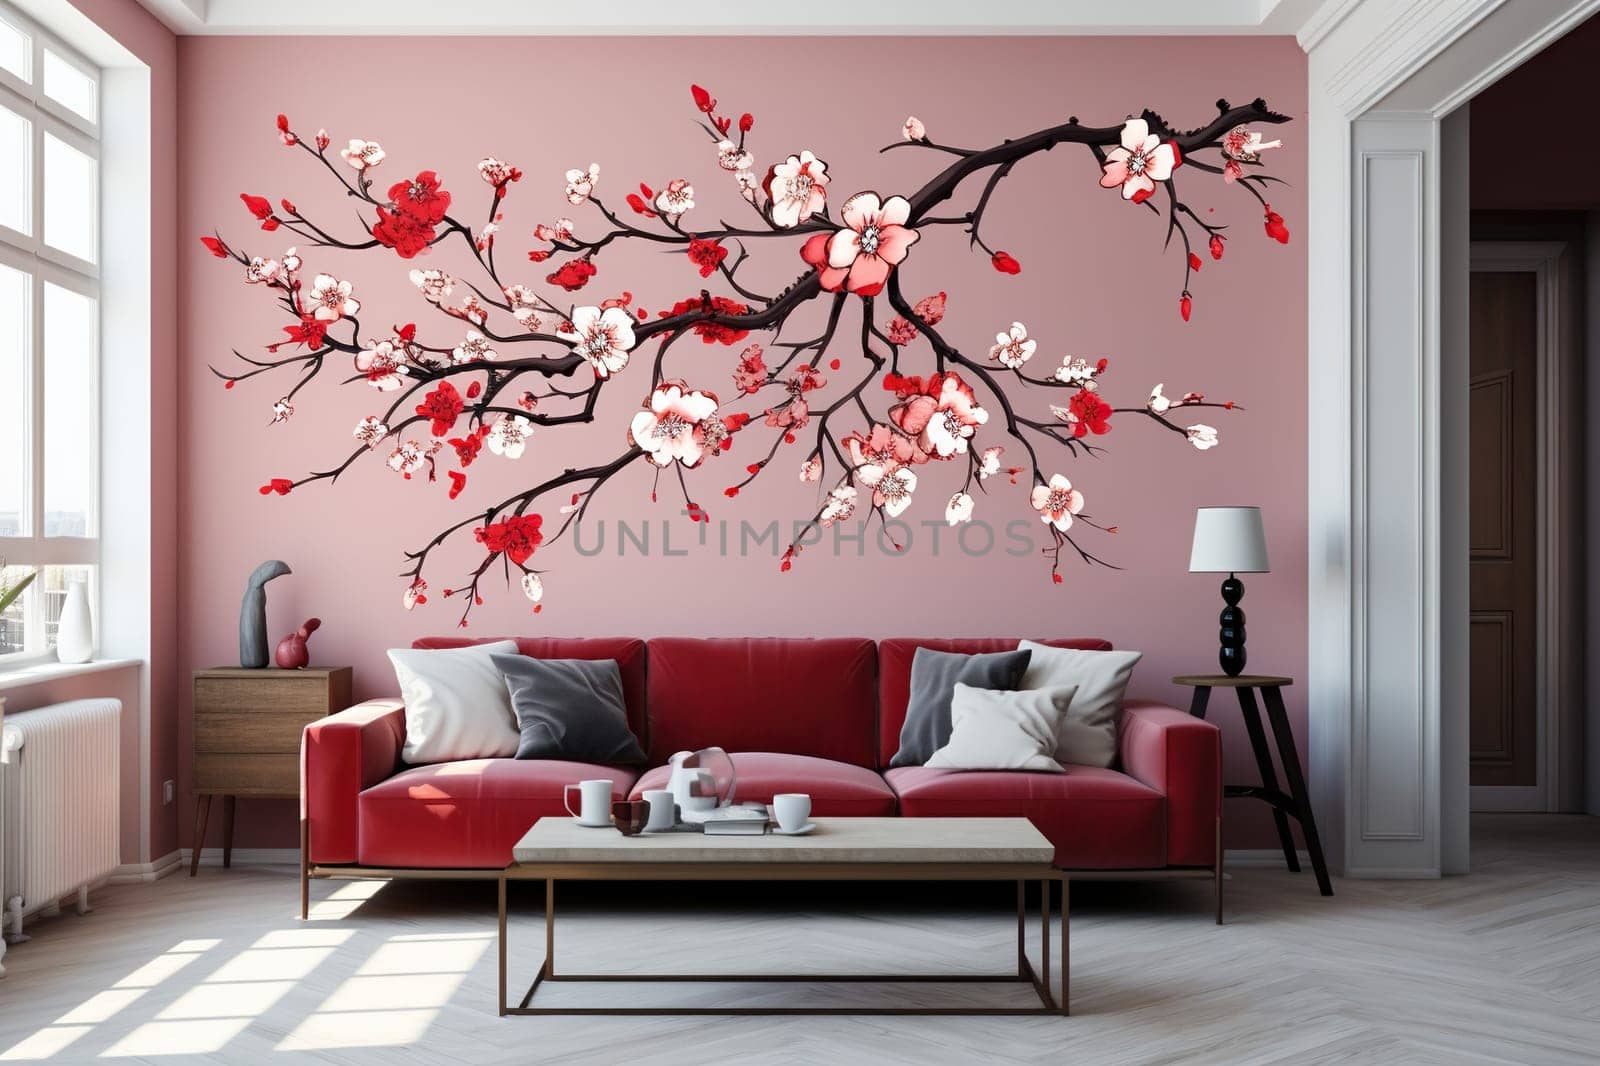 Modern living room interior with a red sofa and a painted sakura branch on the wall.